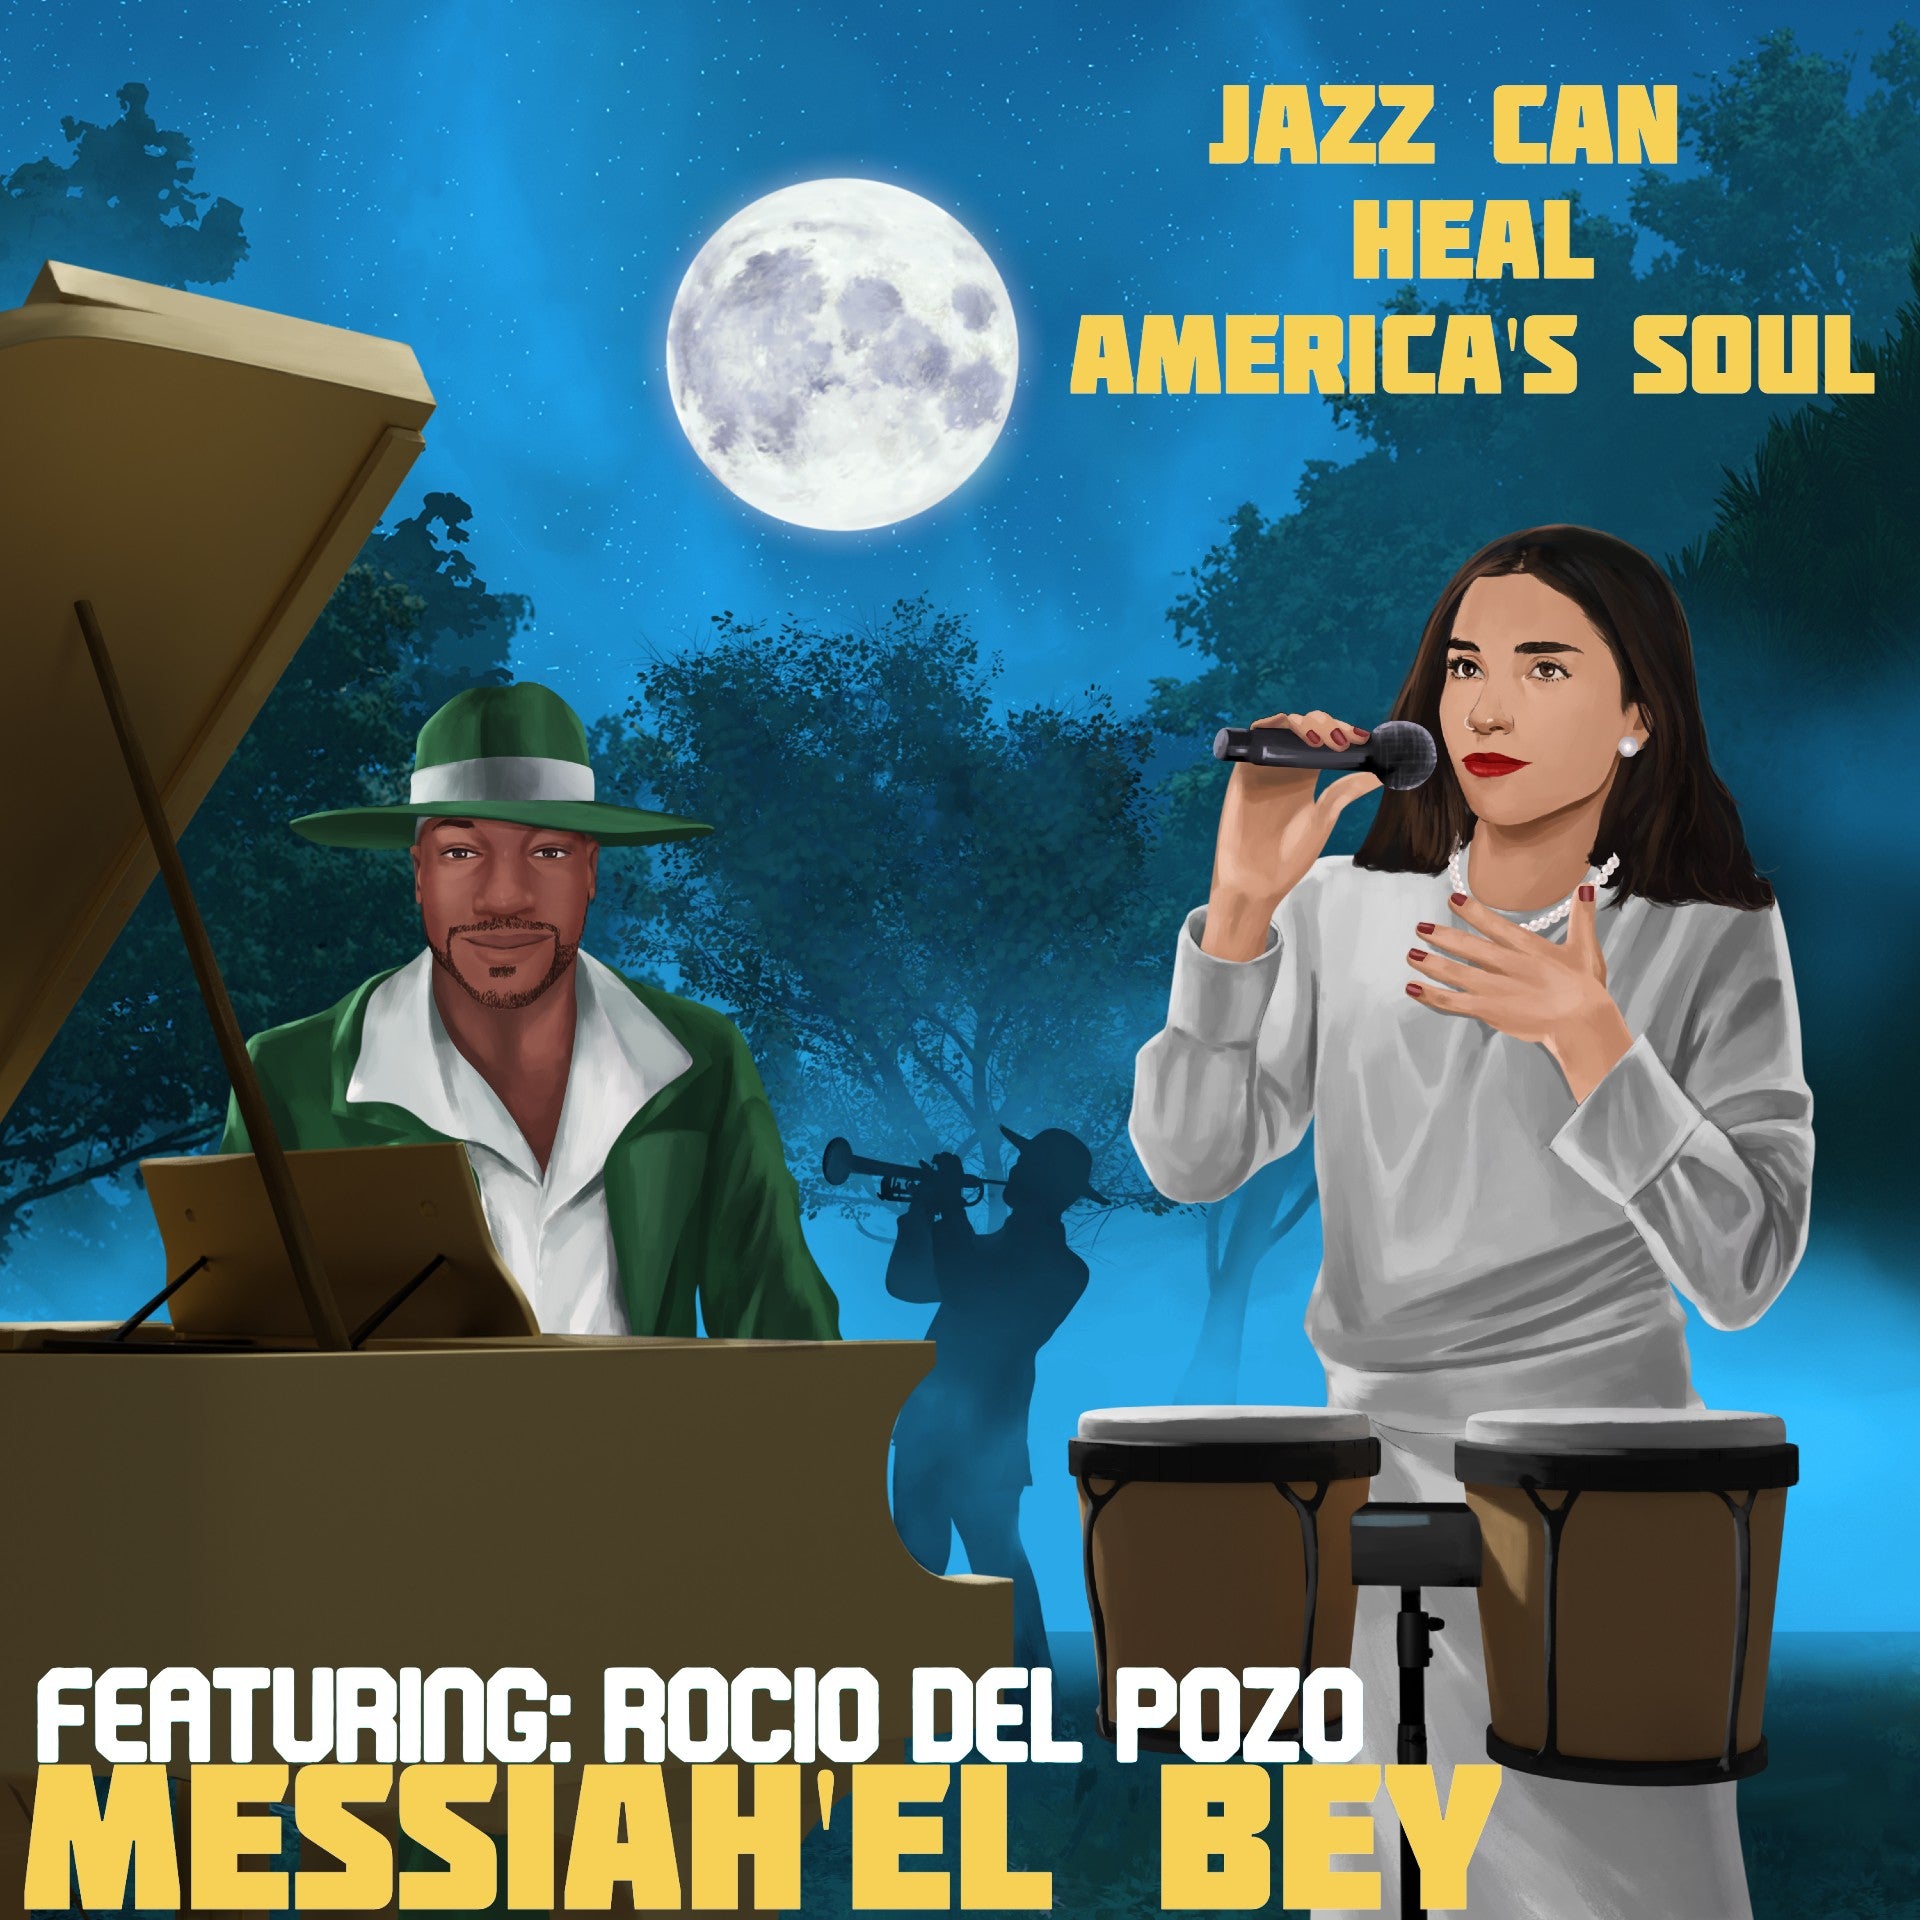 Renowned jazz musician Messiah'el Bey and songstress Rocio Del Pozo shows how 'Jazz Can Heal America's Soul'